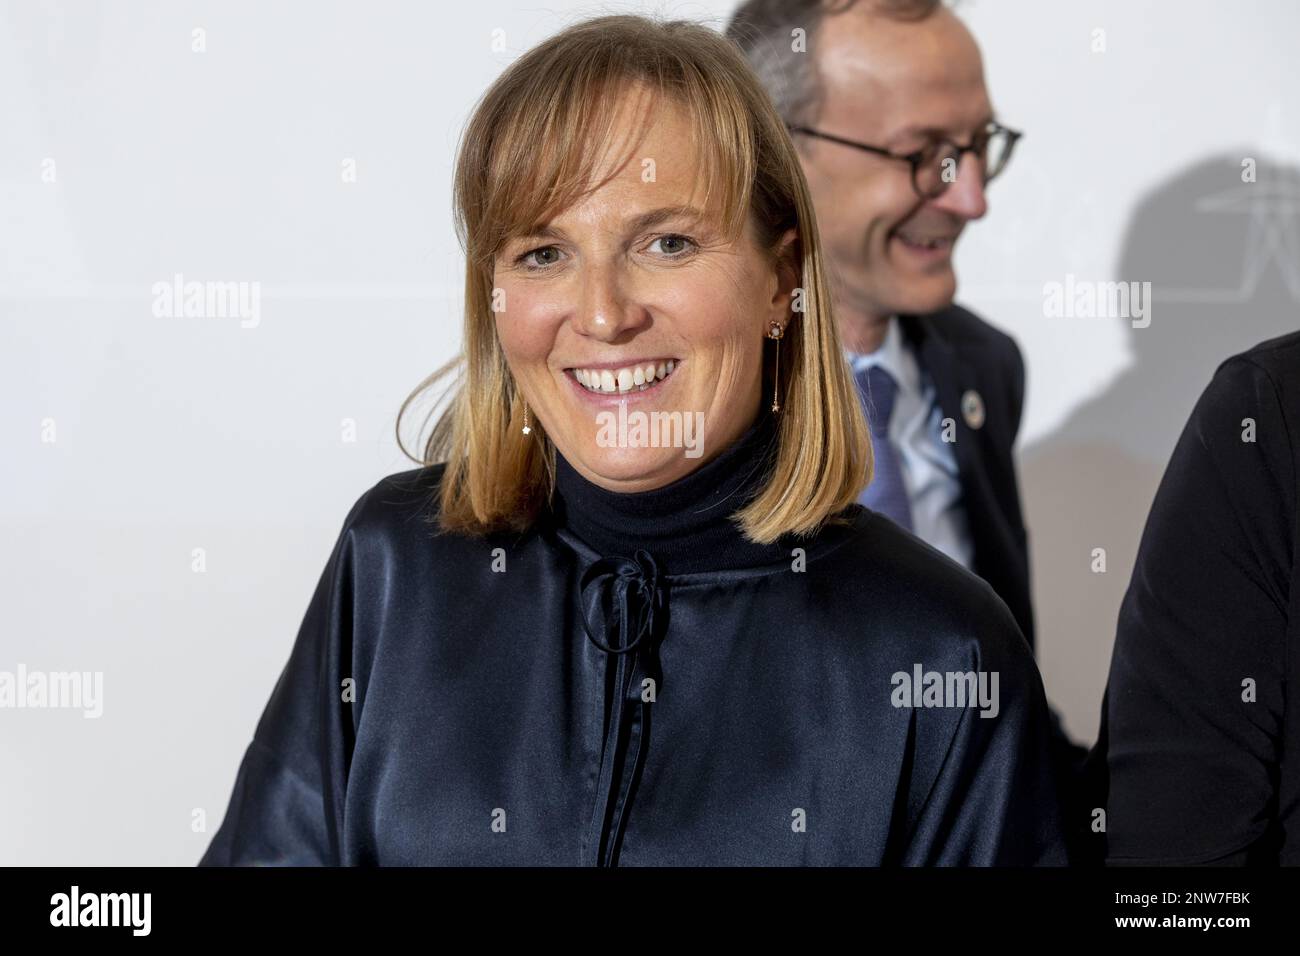 Julie de Nul pictured during the signing of the EPCI contract for the world's first energy island in the North Sea, the Princess Elisabeth Island, Tuesday 28 February 2023, at the Elia headquarters in Brussels. BELGA PHOTO HATIM KAGHAT Stock Photo